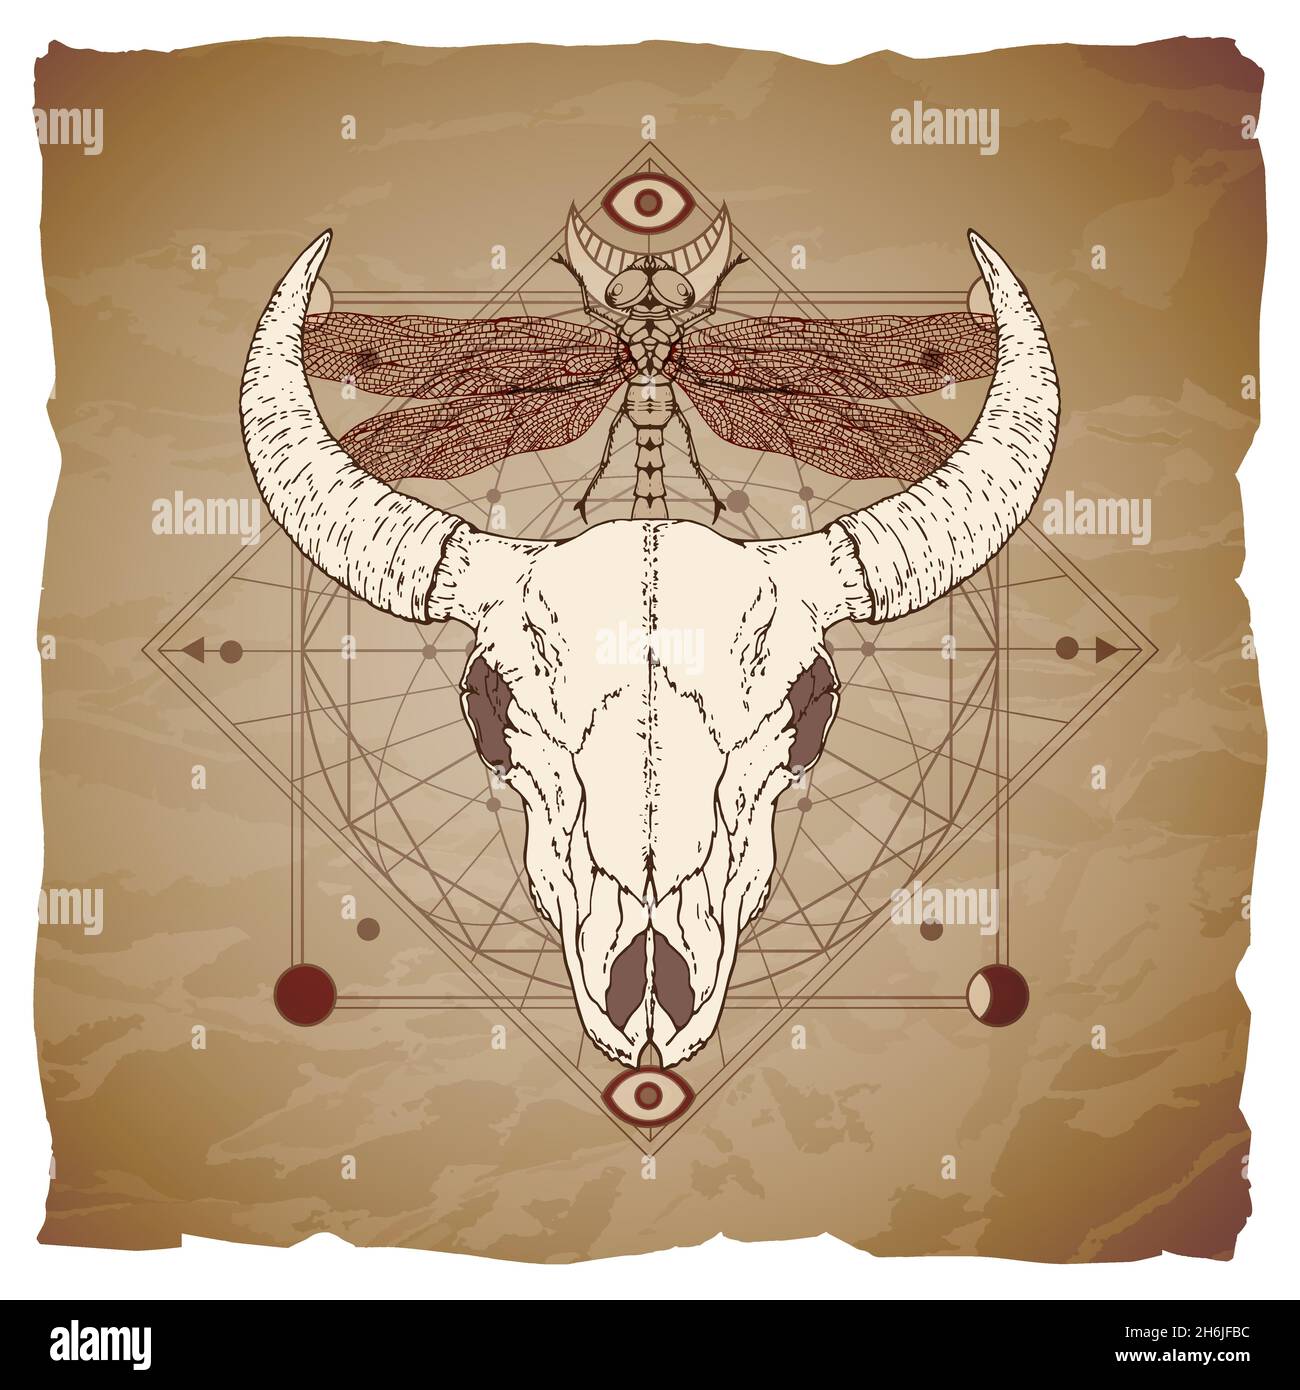 Vector illustration with hand drawn bull skull, dragonfly and Sacred geometric symbol on vintage paper background with torn edges. Abstract mystic sig Stock Vector